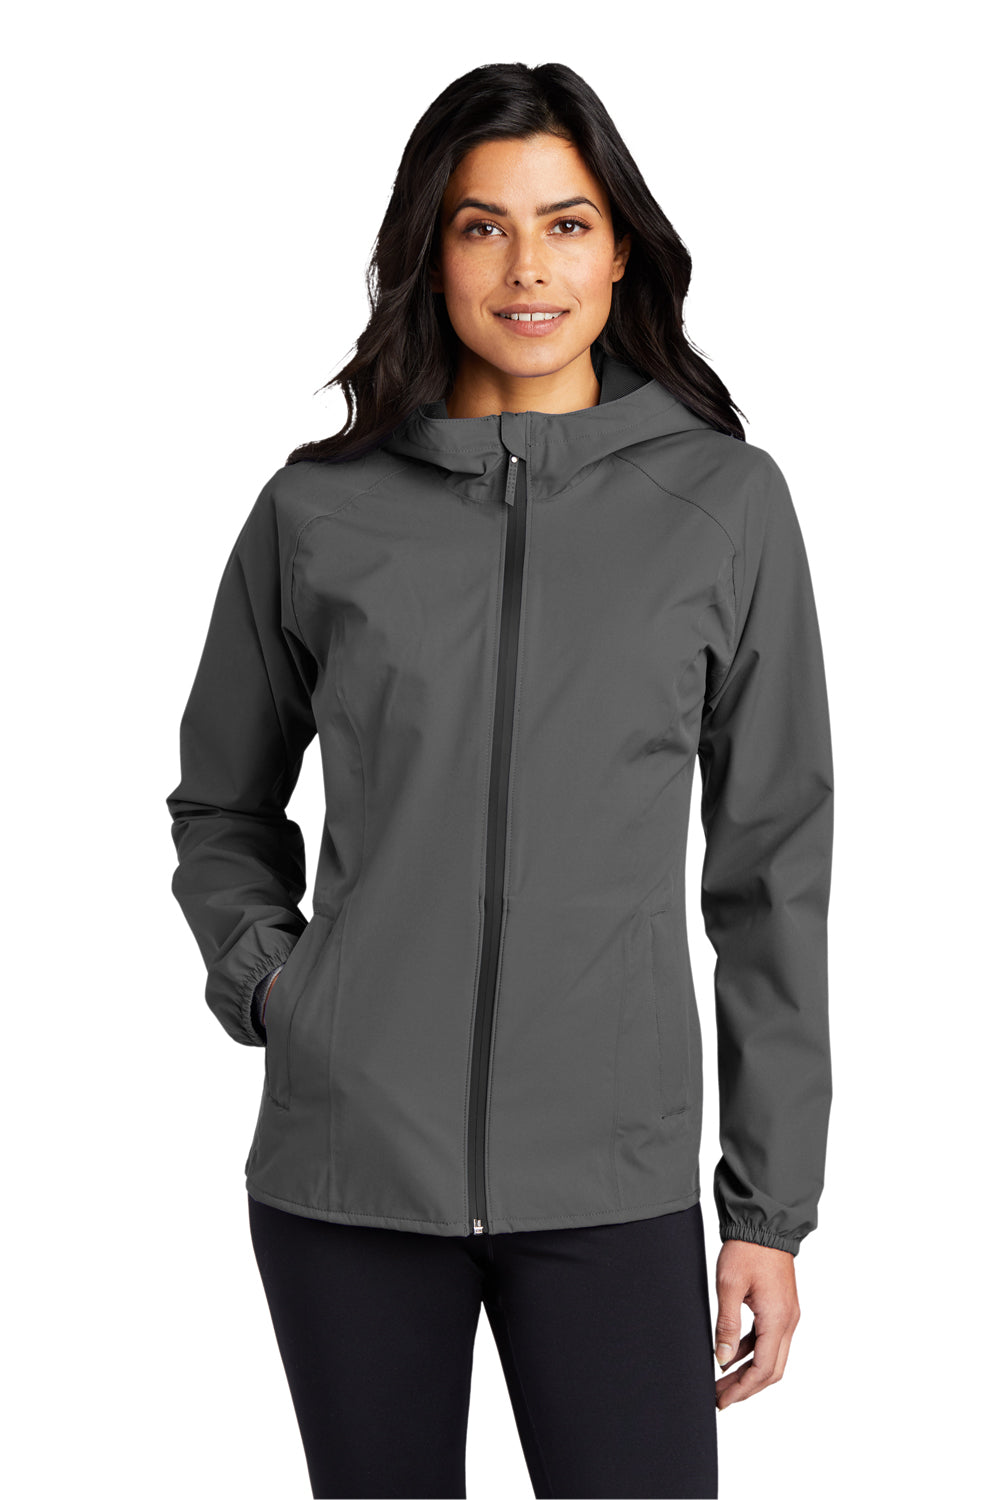 Port Authority Womens Essential Full Zip Hooded Rain Jacket Graphite Grey Front